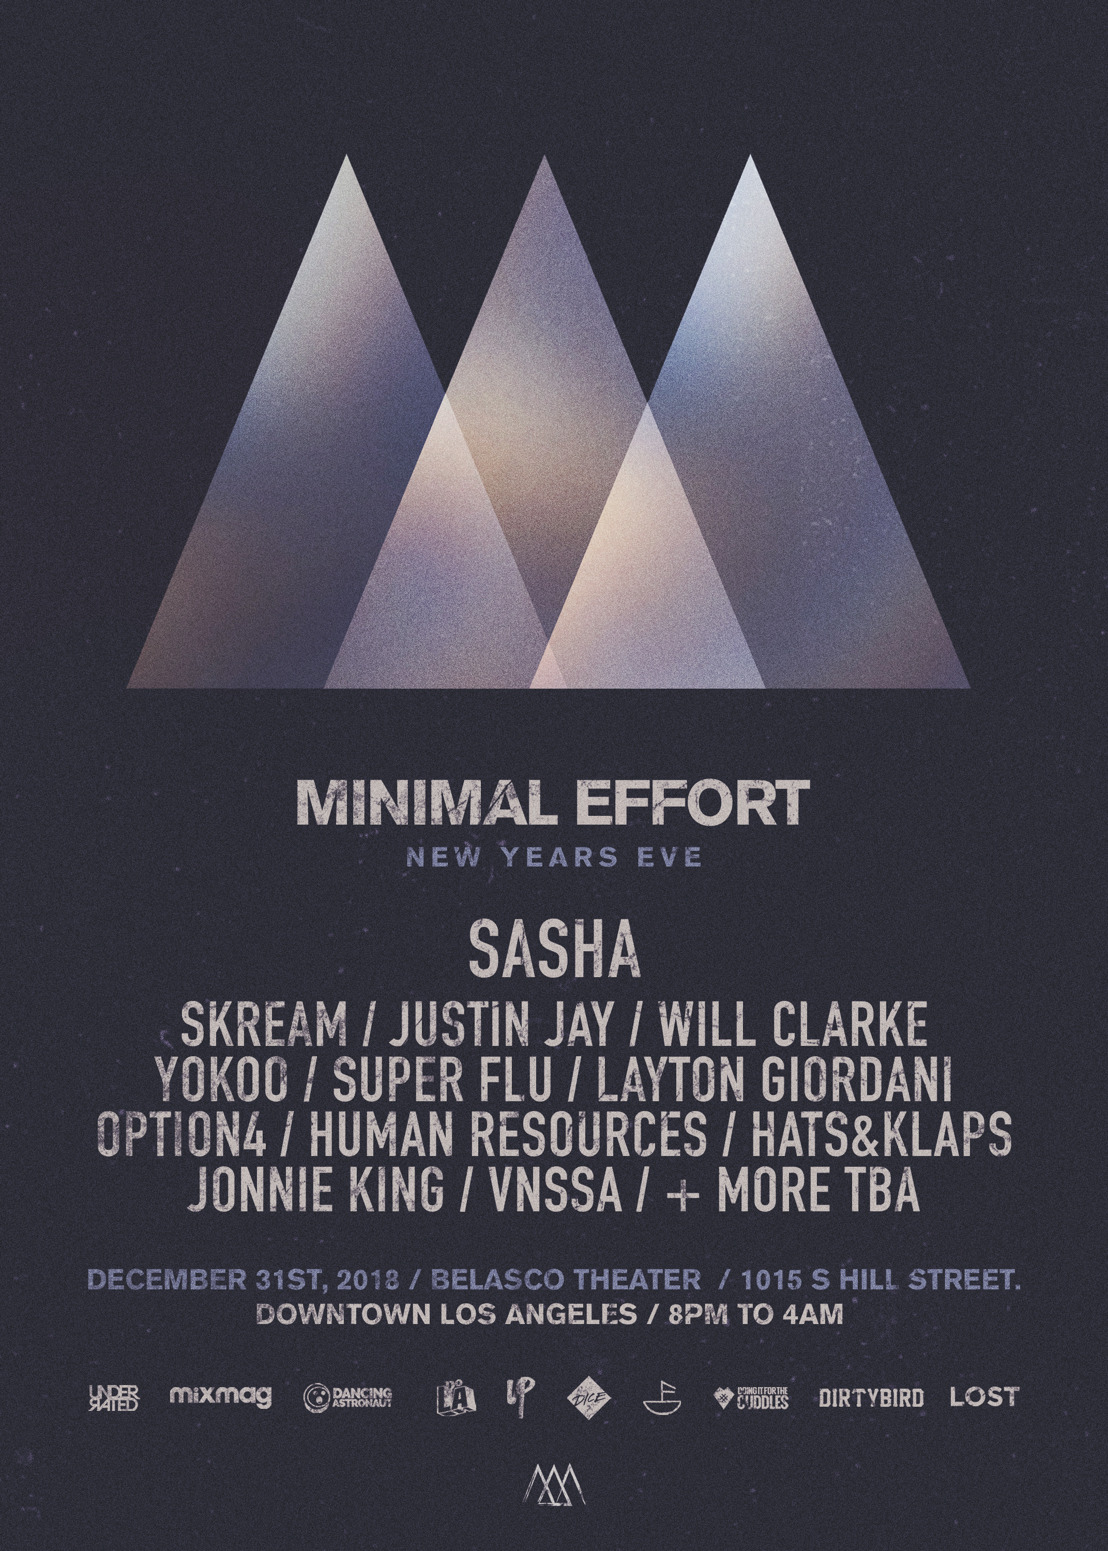 Minimal Effort Releases Phase One Lineup For New Year’s Eve Event